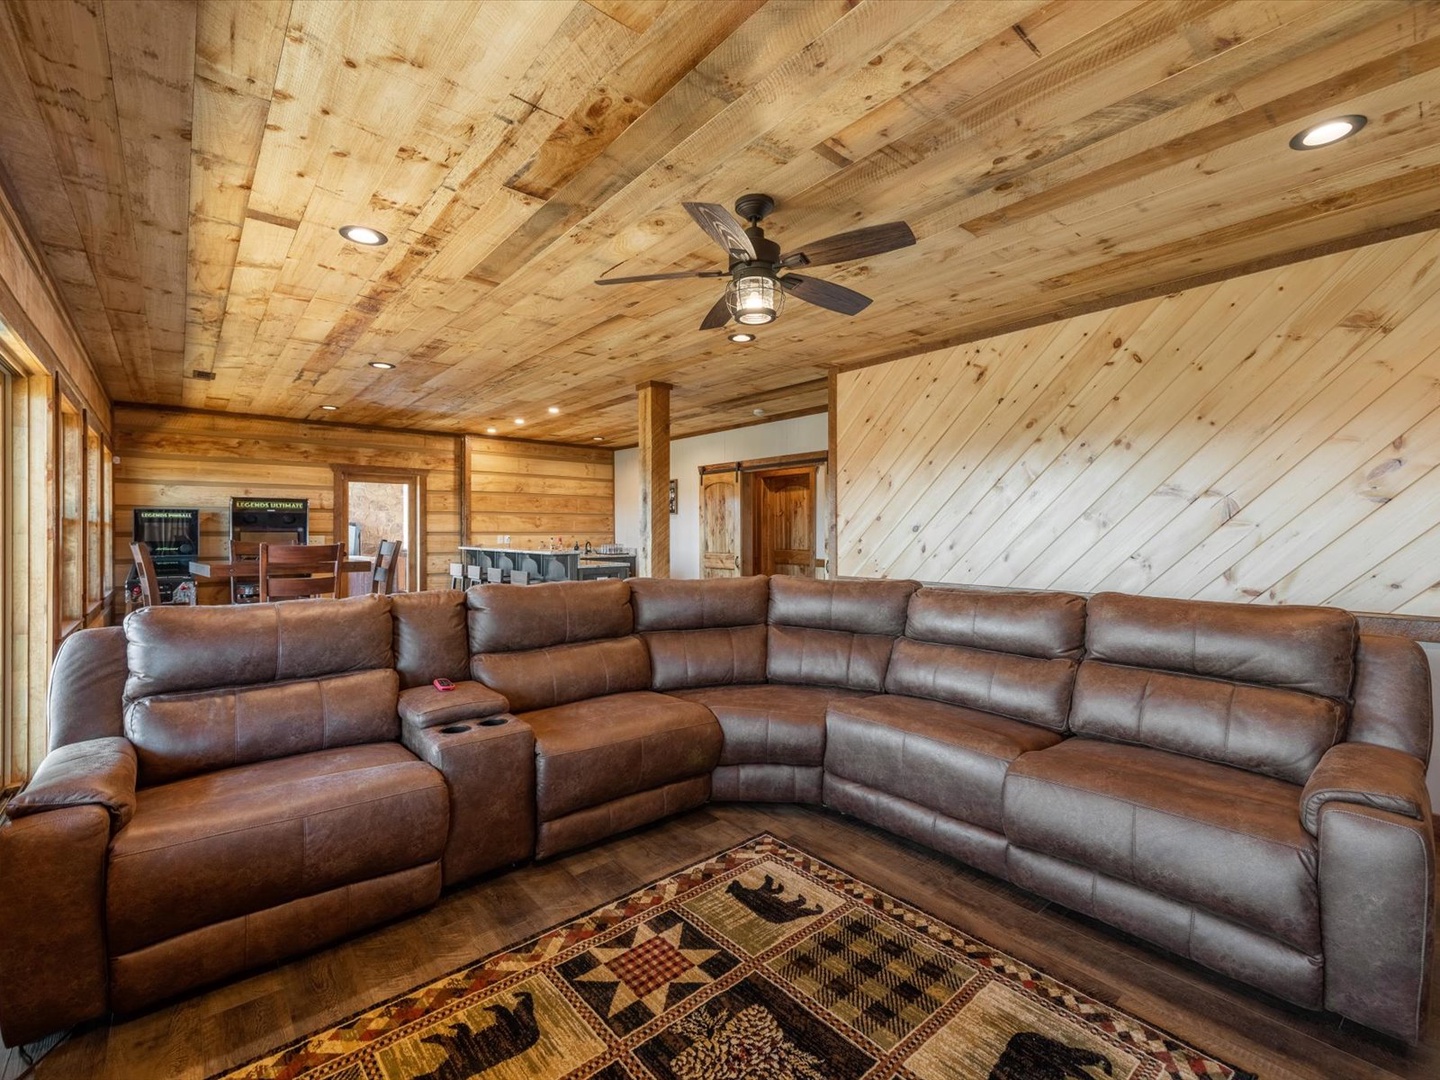 Tranquil Escape of Blue Ridge - Lower Level Plush Seating Area